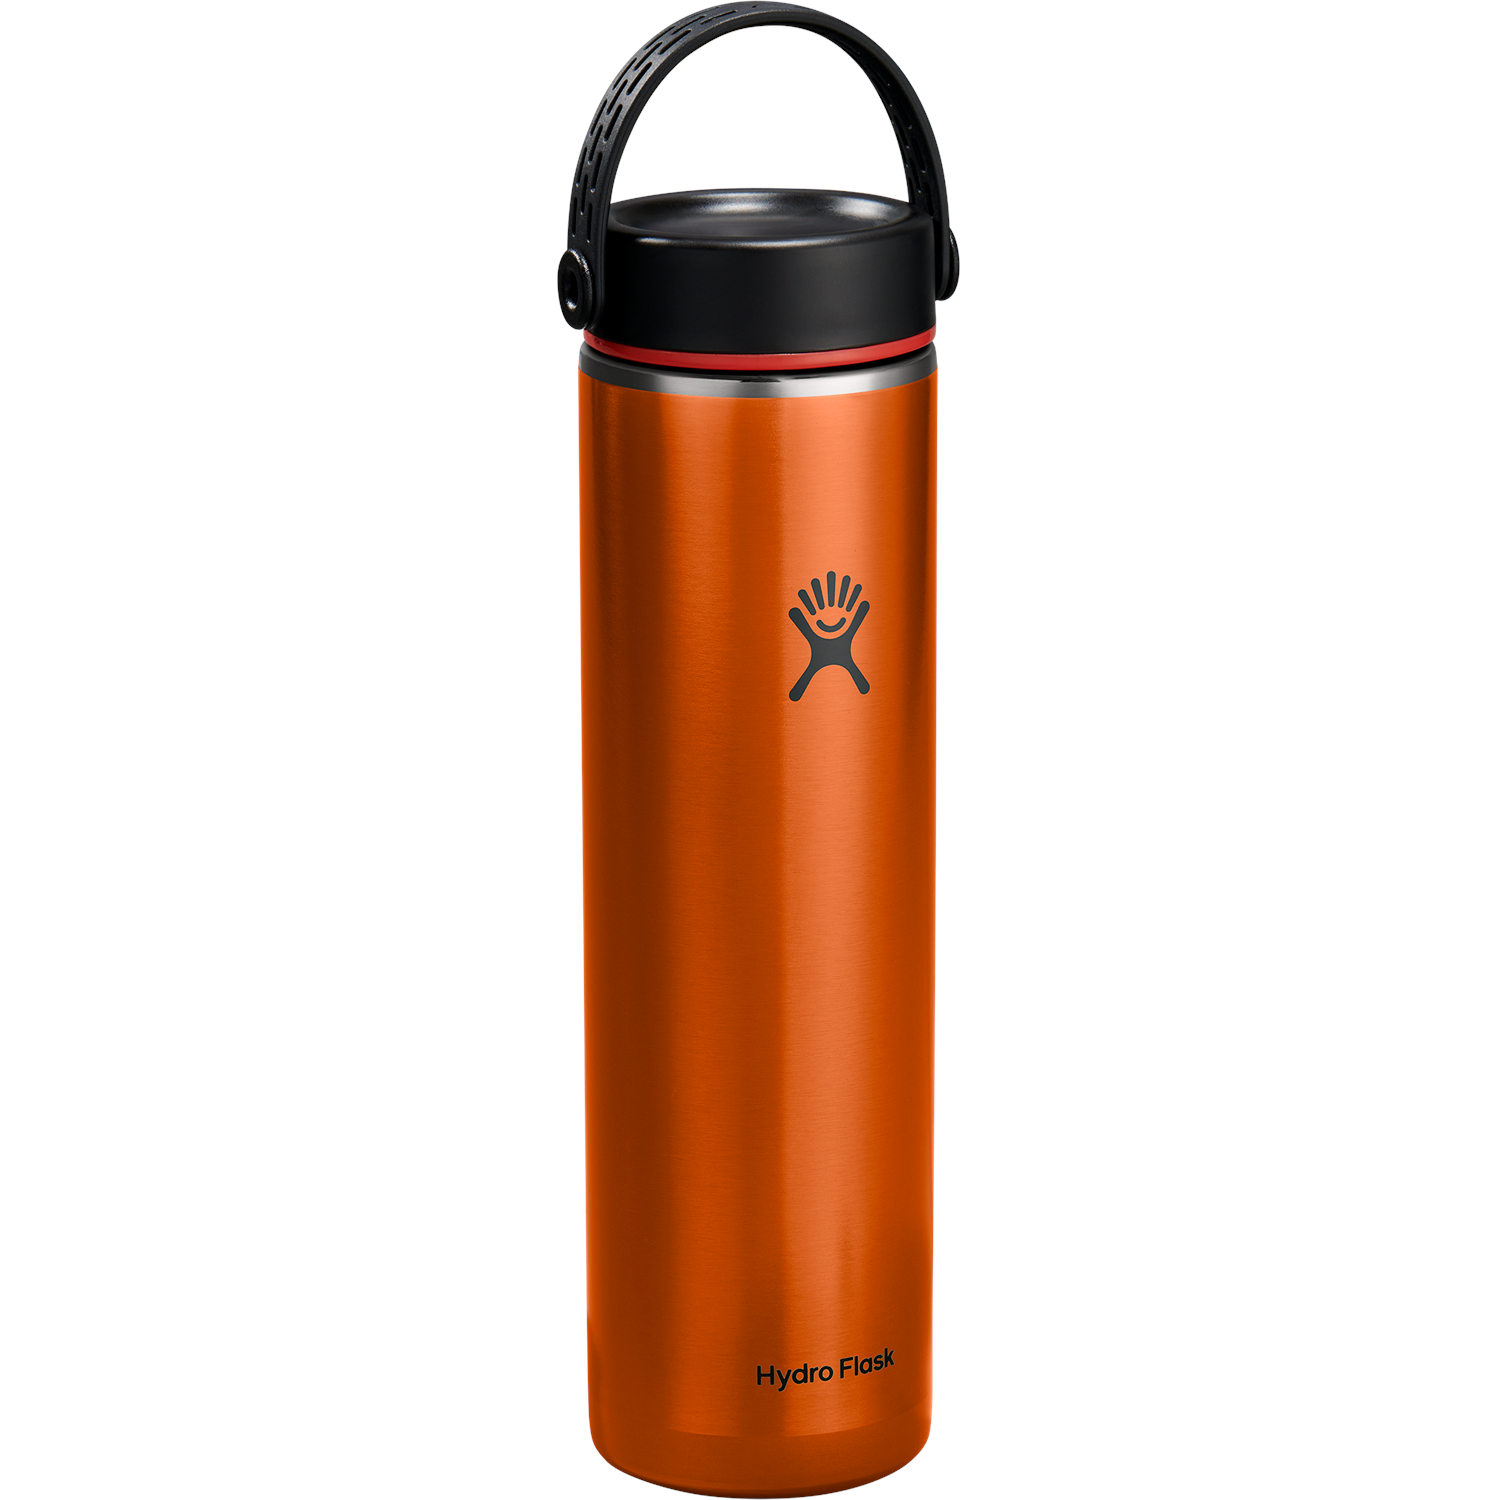 https://images.evo.com/imgp/zoom/167422/995485/hydro-flask-24oz-lightweight-wide-mouth-water-bottle-.jpg